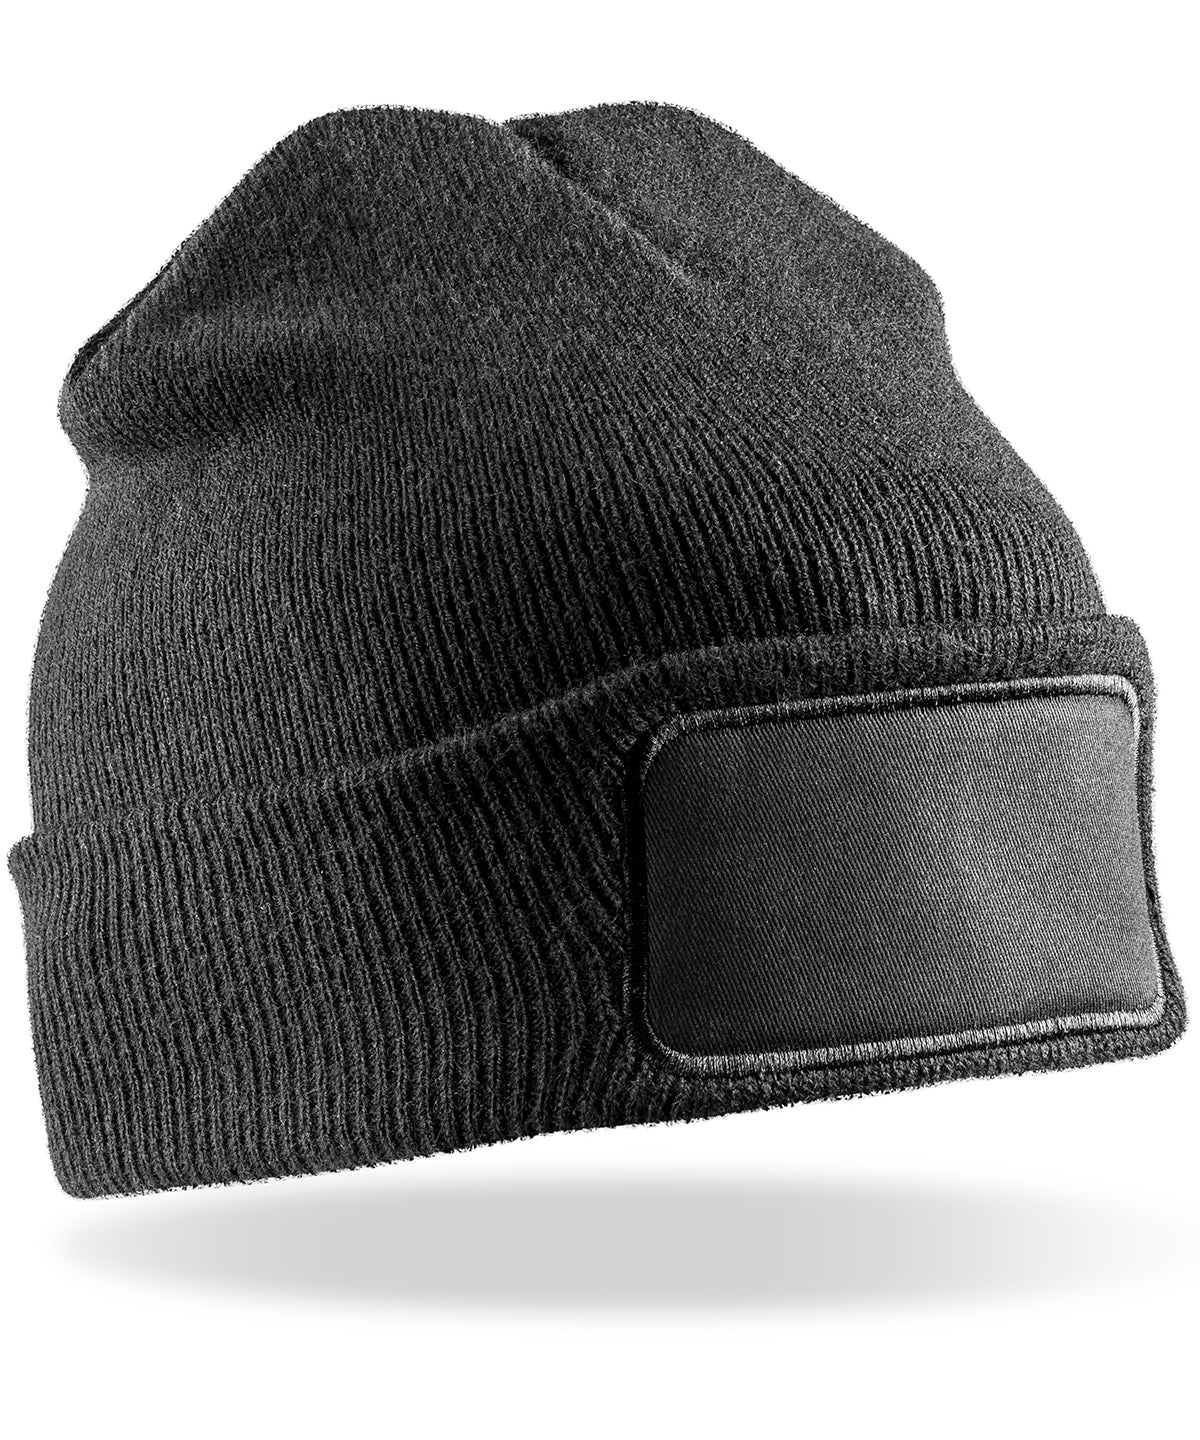 Result Double-Knit Thinsulateprinters Beanie